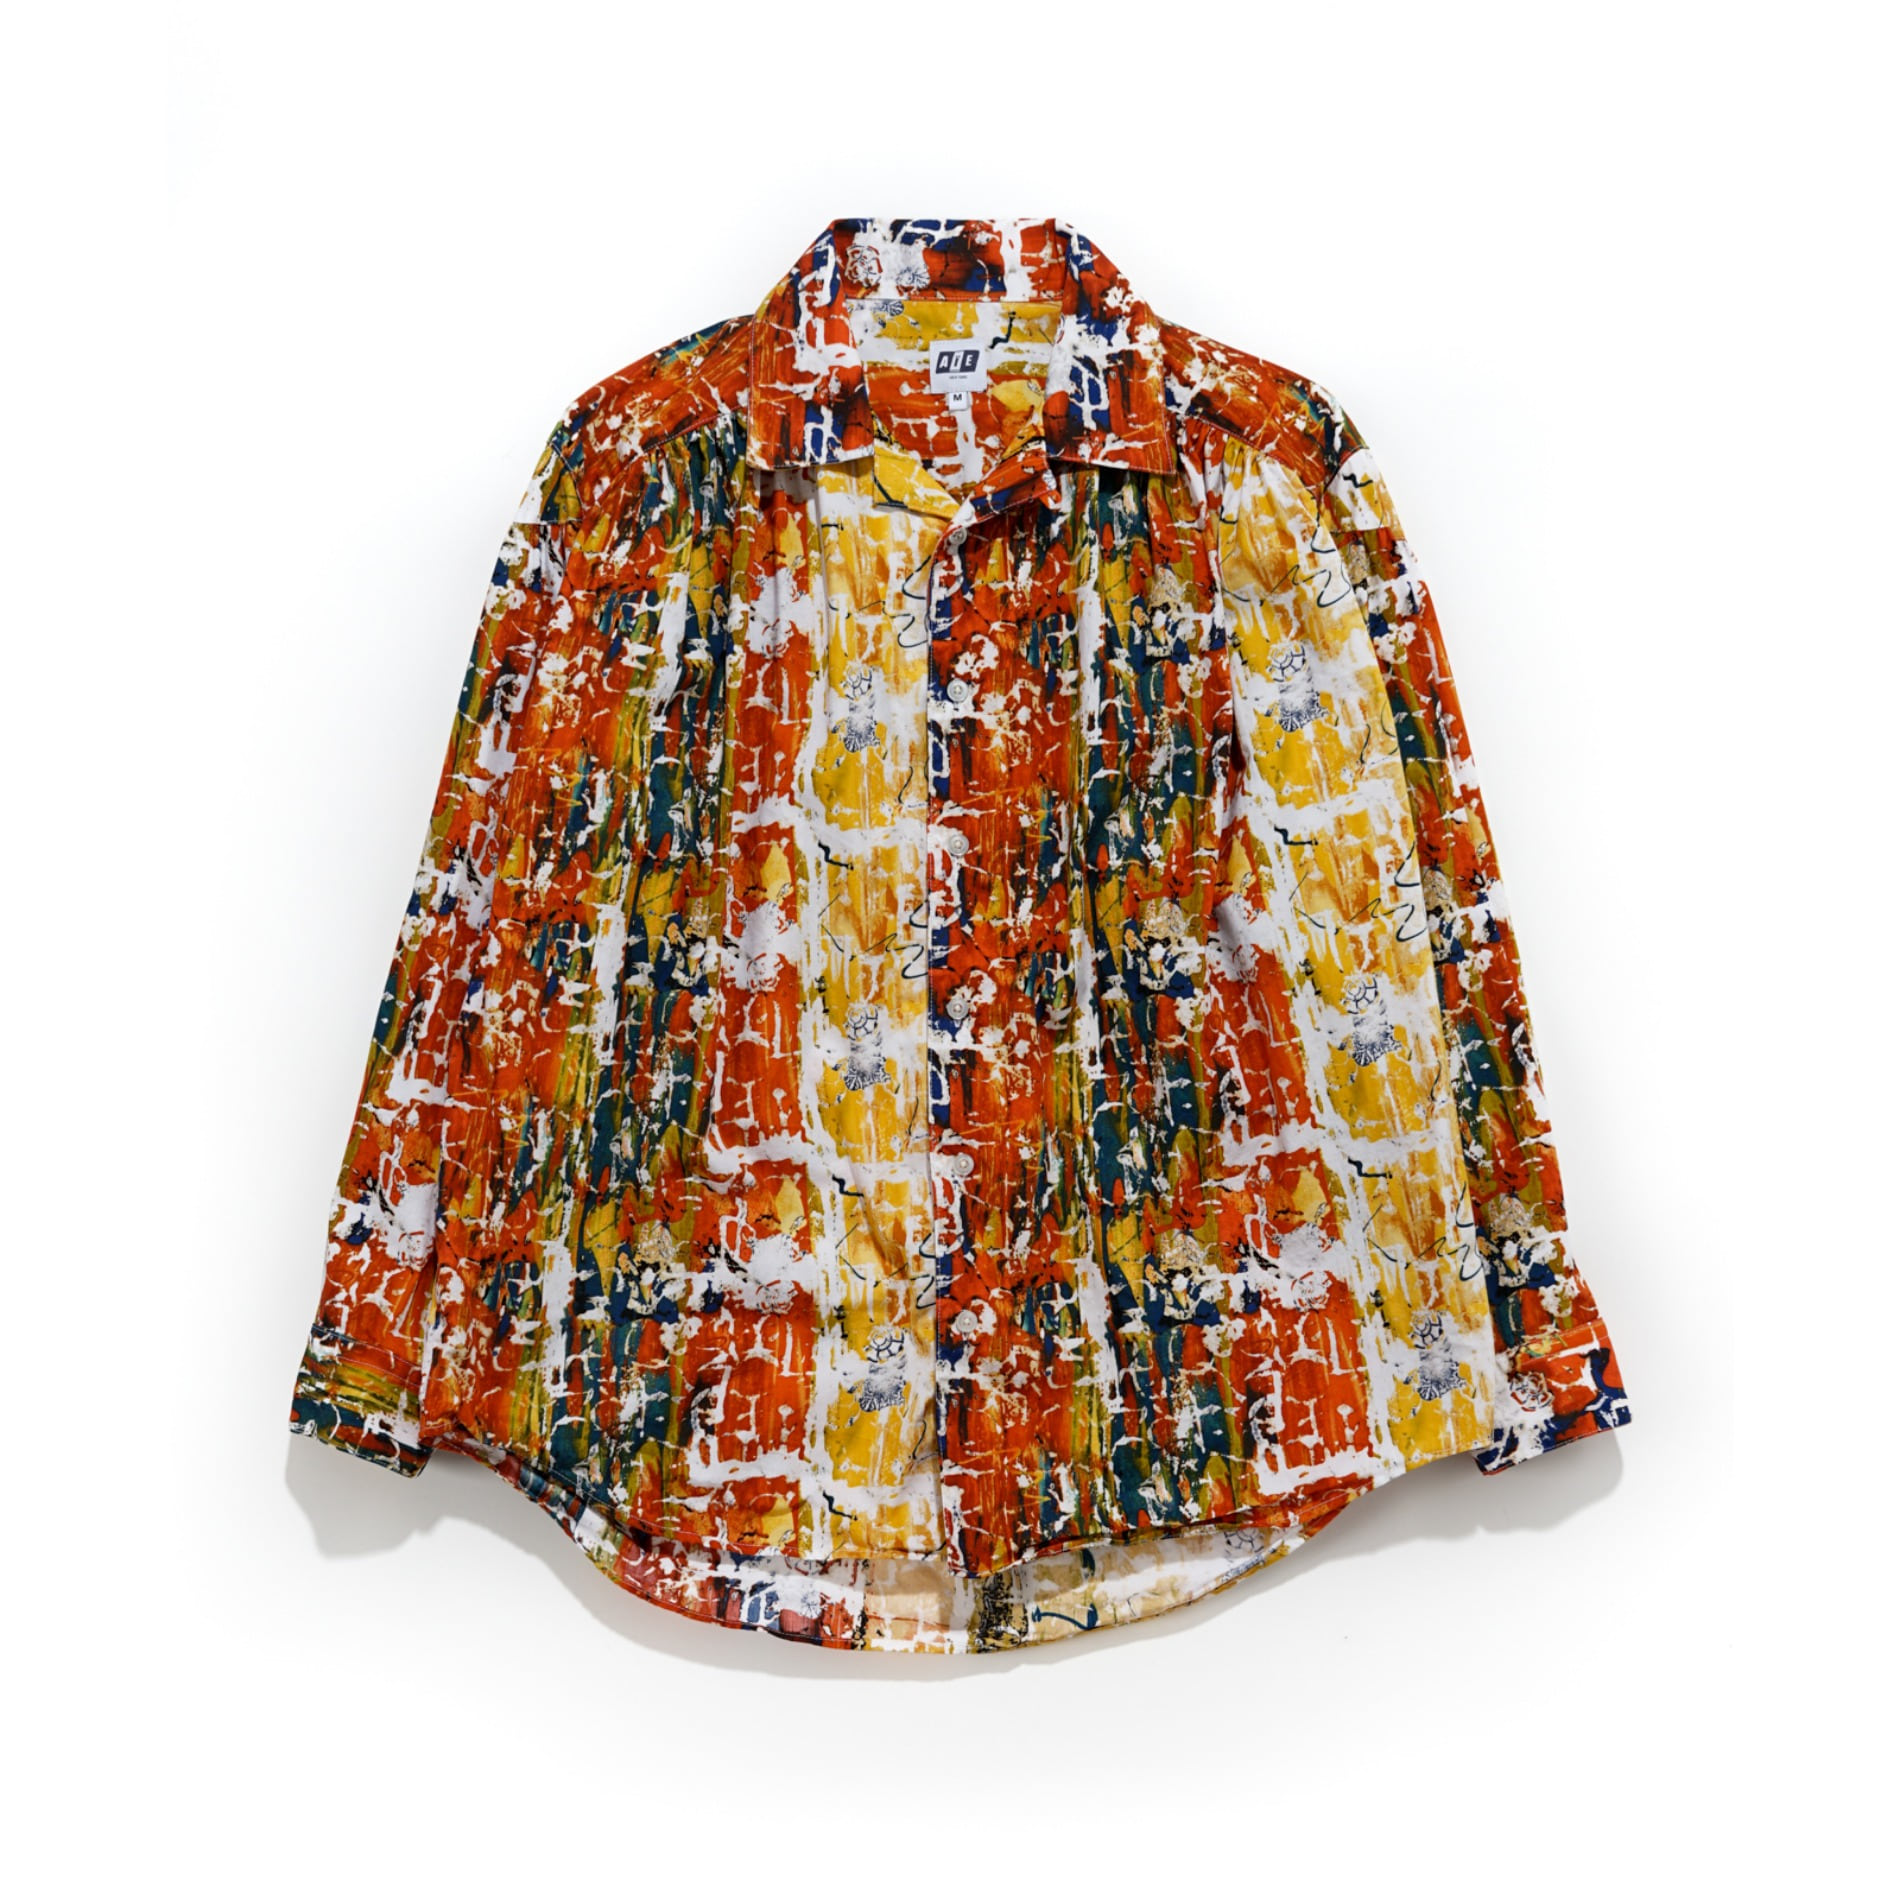 AW21 AIE / PAINTER SHIRT YELLOW ORANGE COTTON ABSTRACT